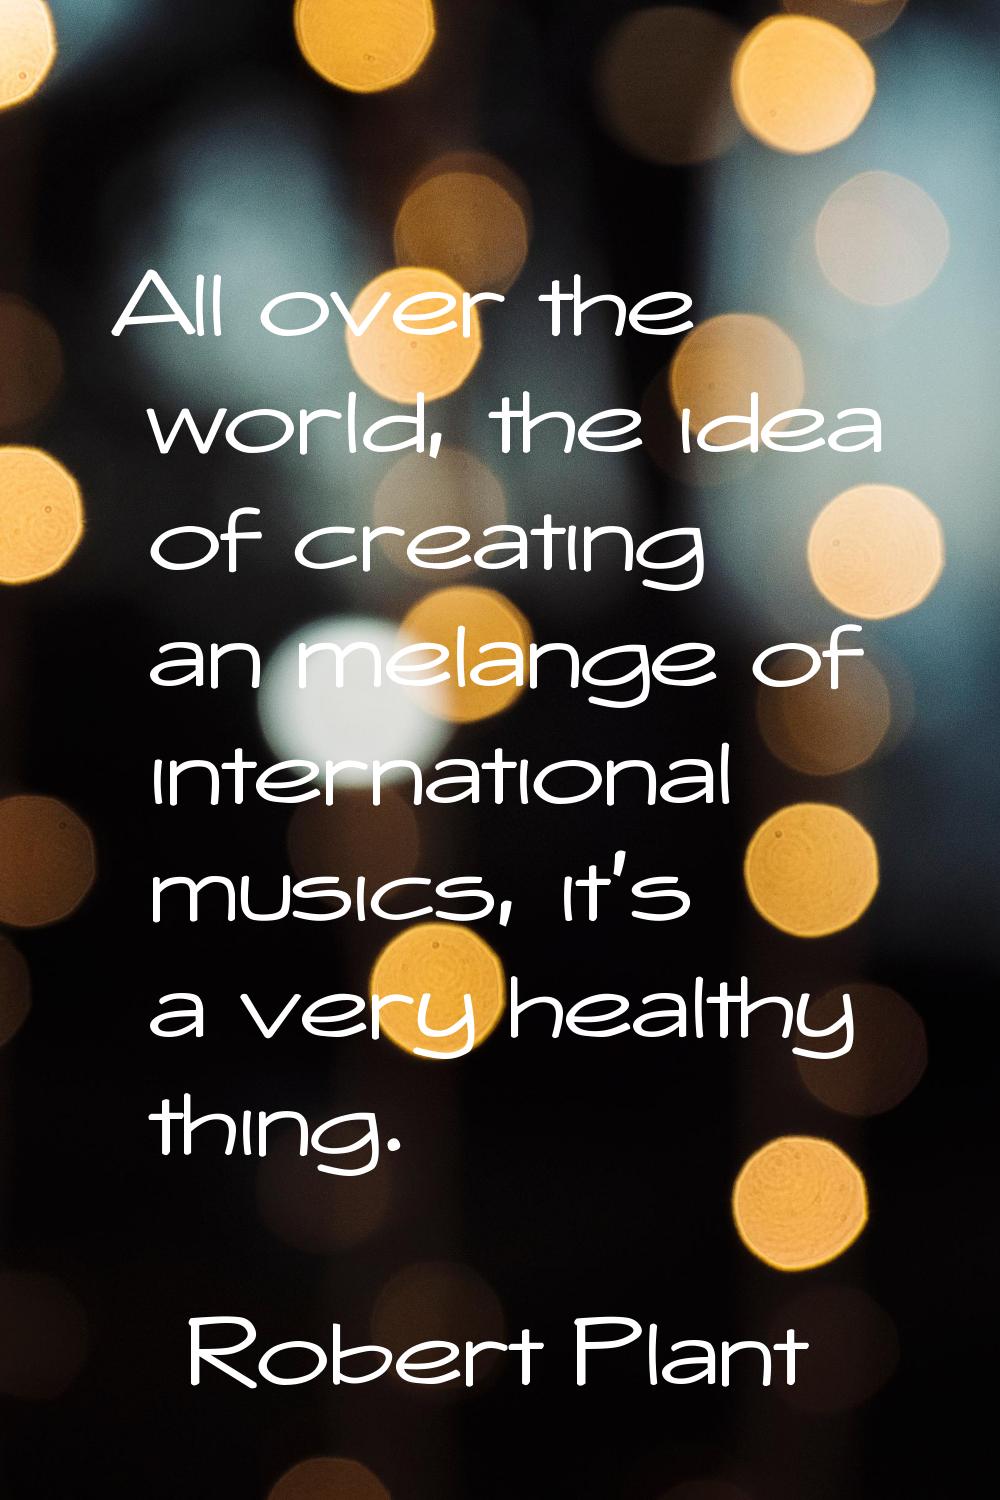 All over the world, the idea of creating an melange of international musics, it's a very healthy th